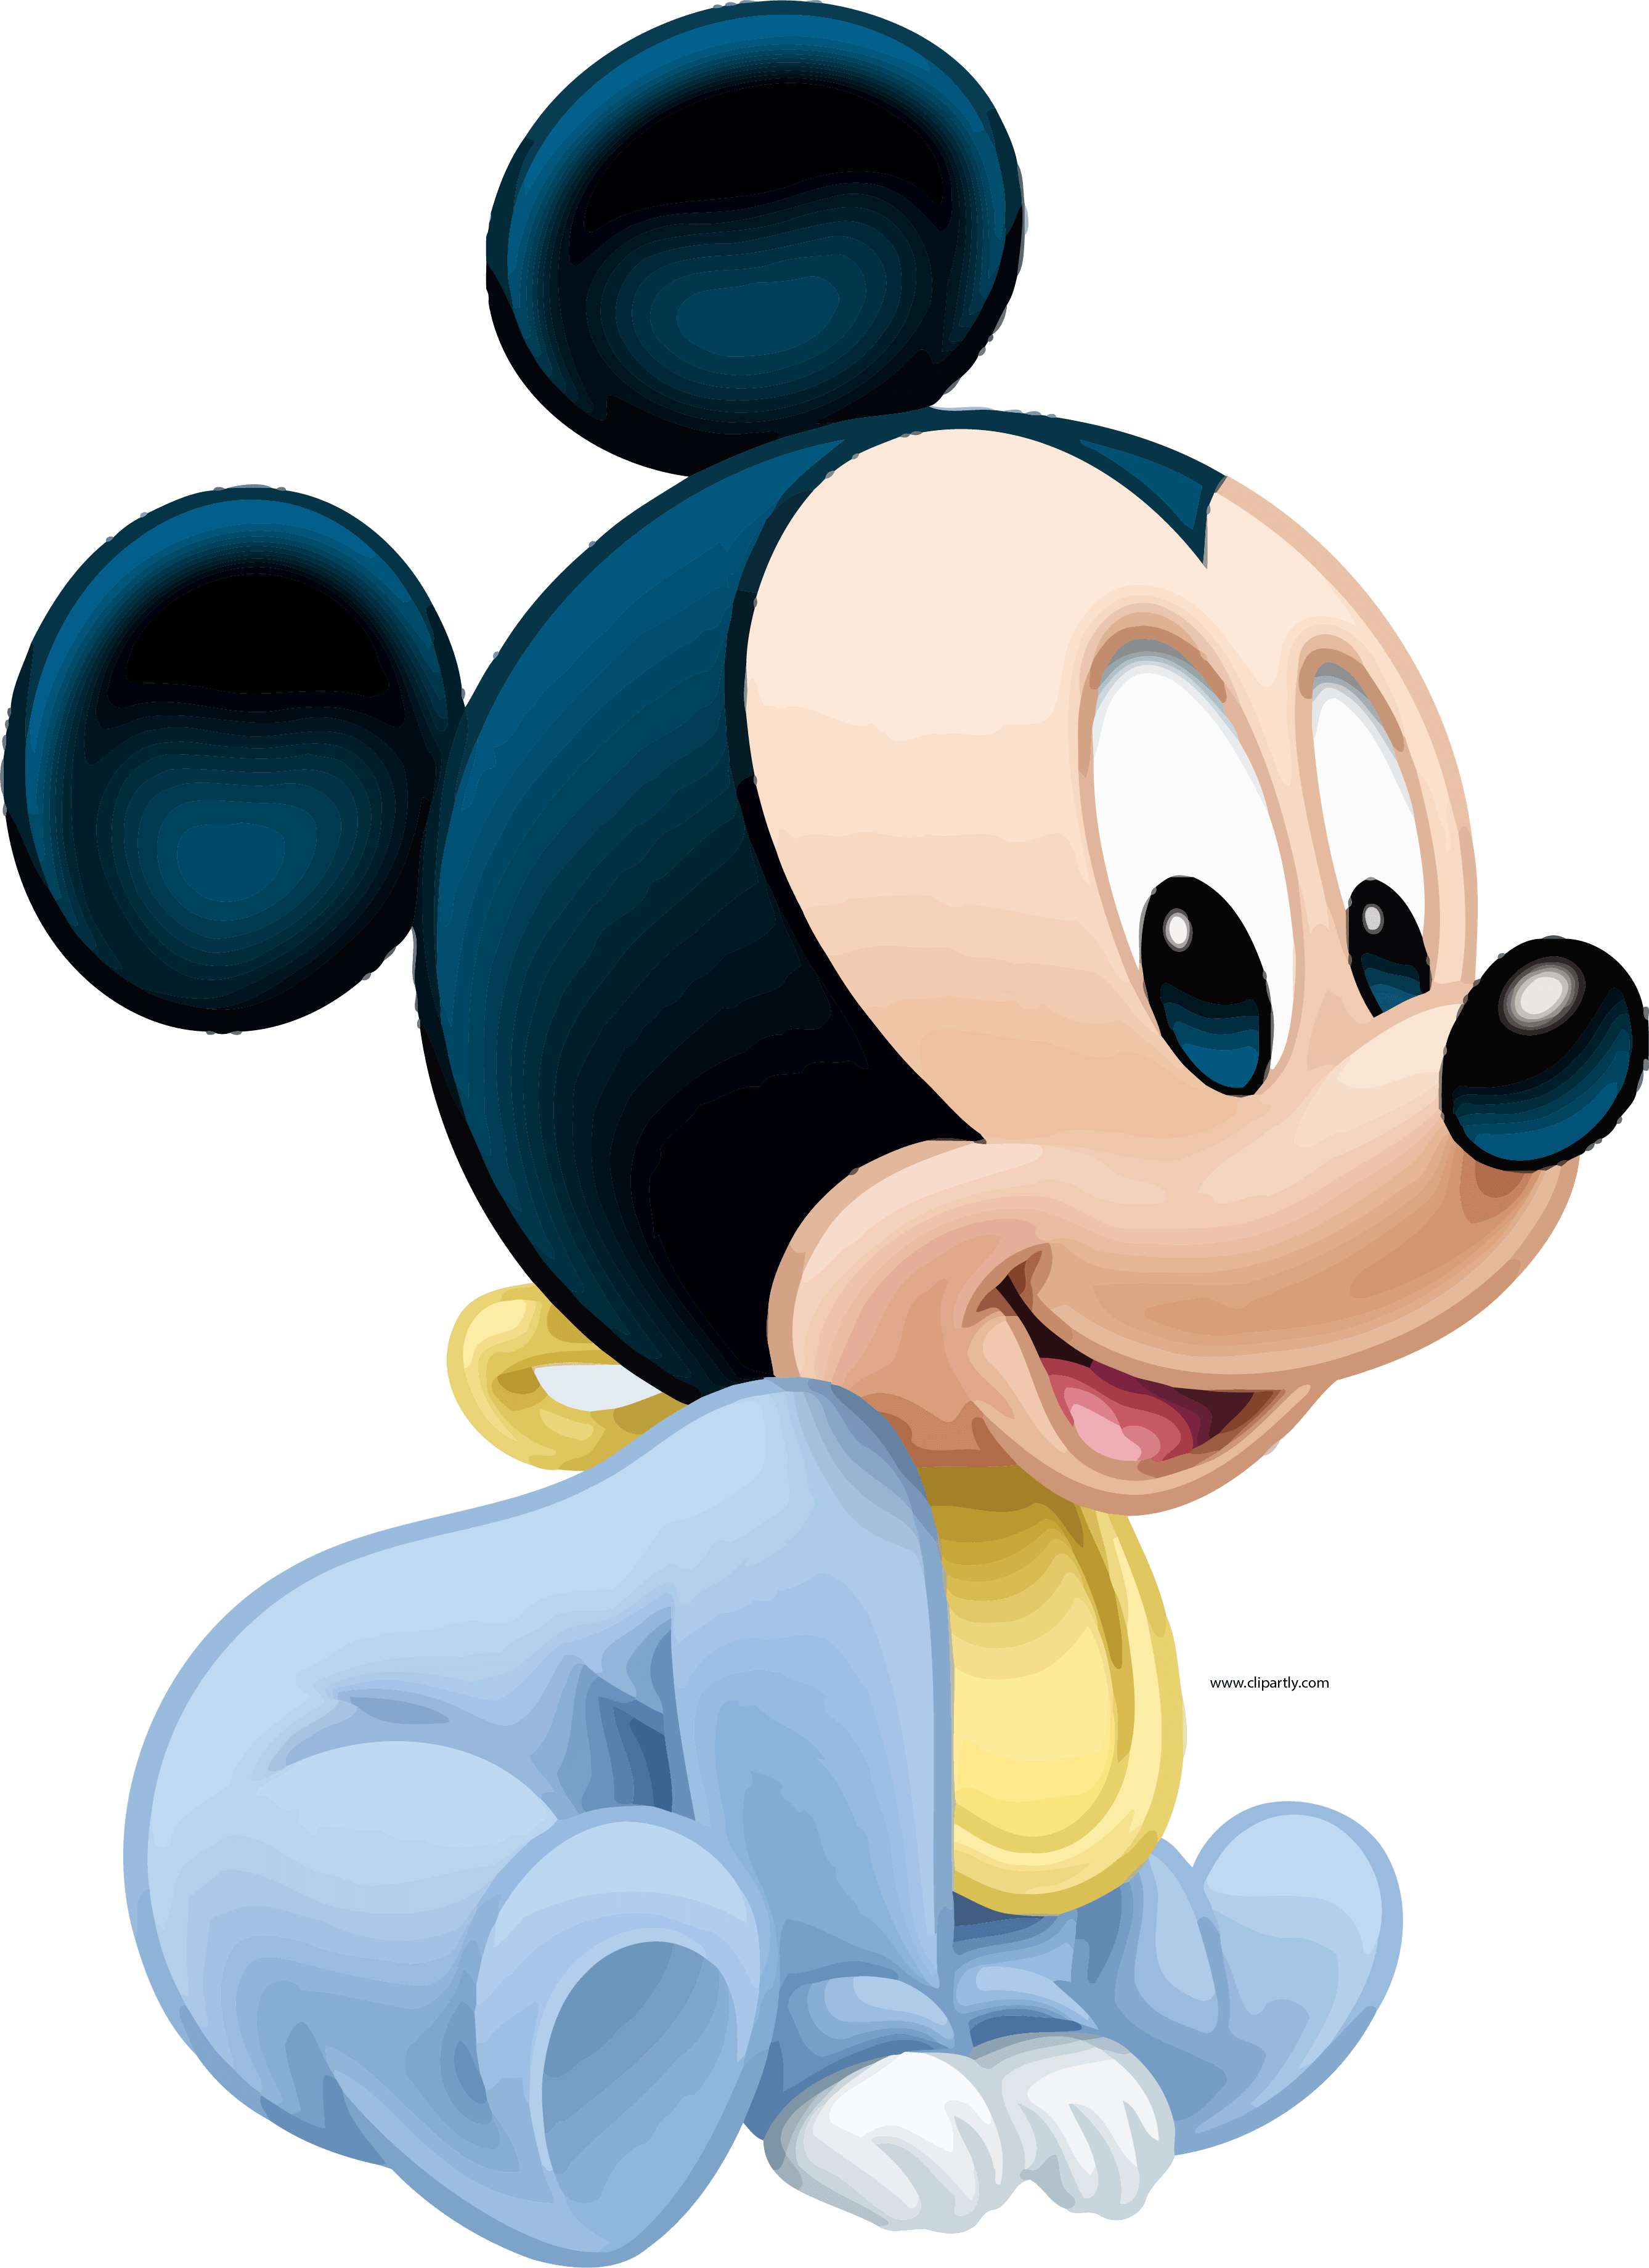 Baby Mickey Mouse Wallpapers on WallpaperDog